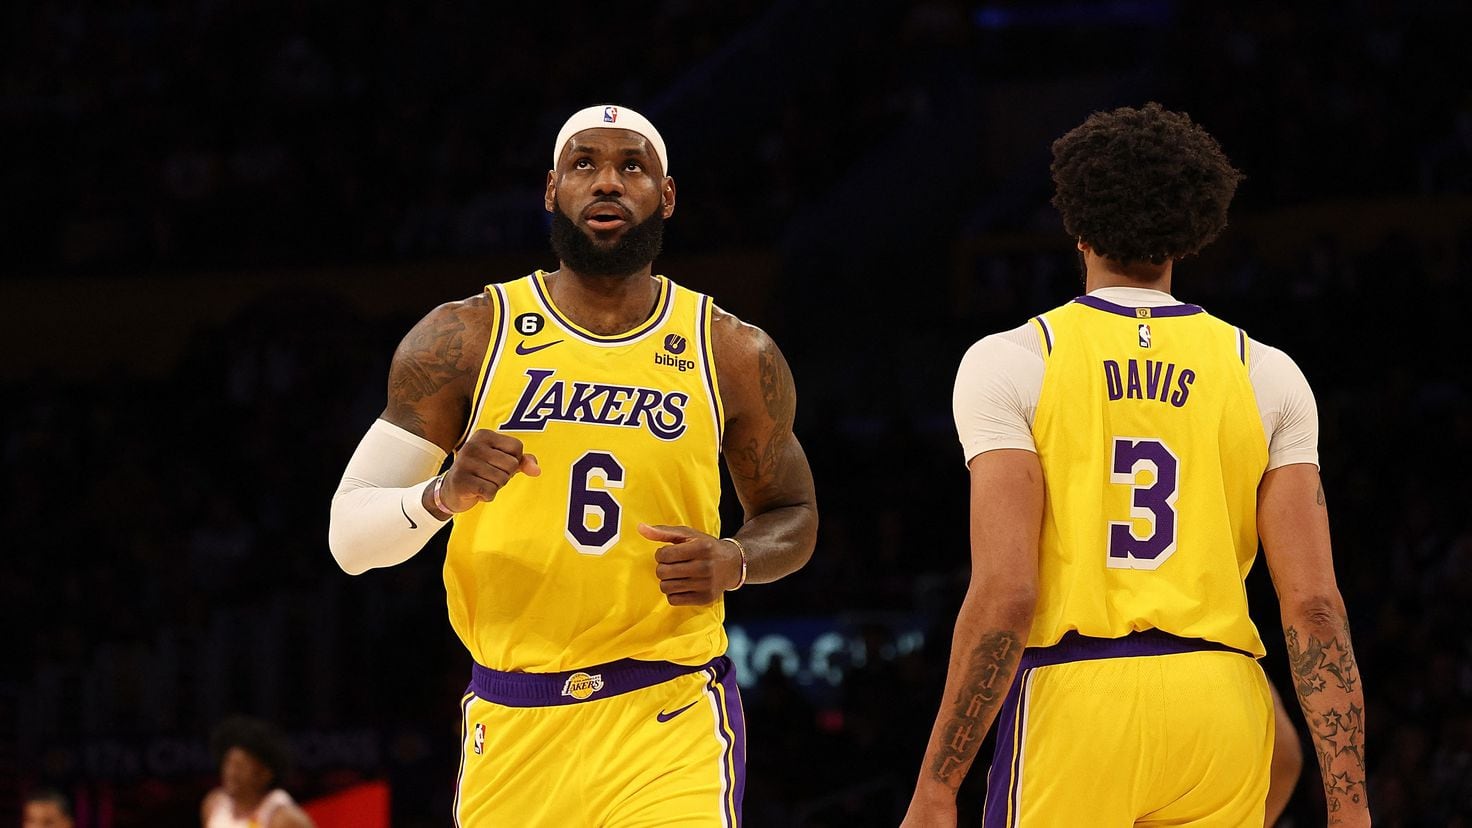 Lakers' LeBron James doesn't like playing NBA games without fans